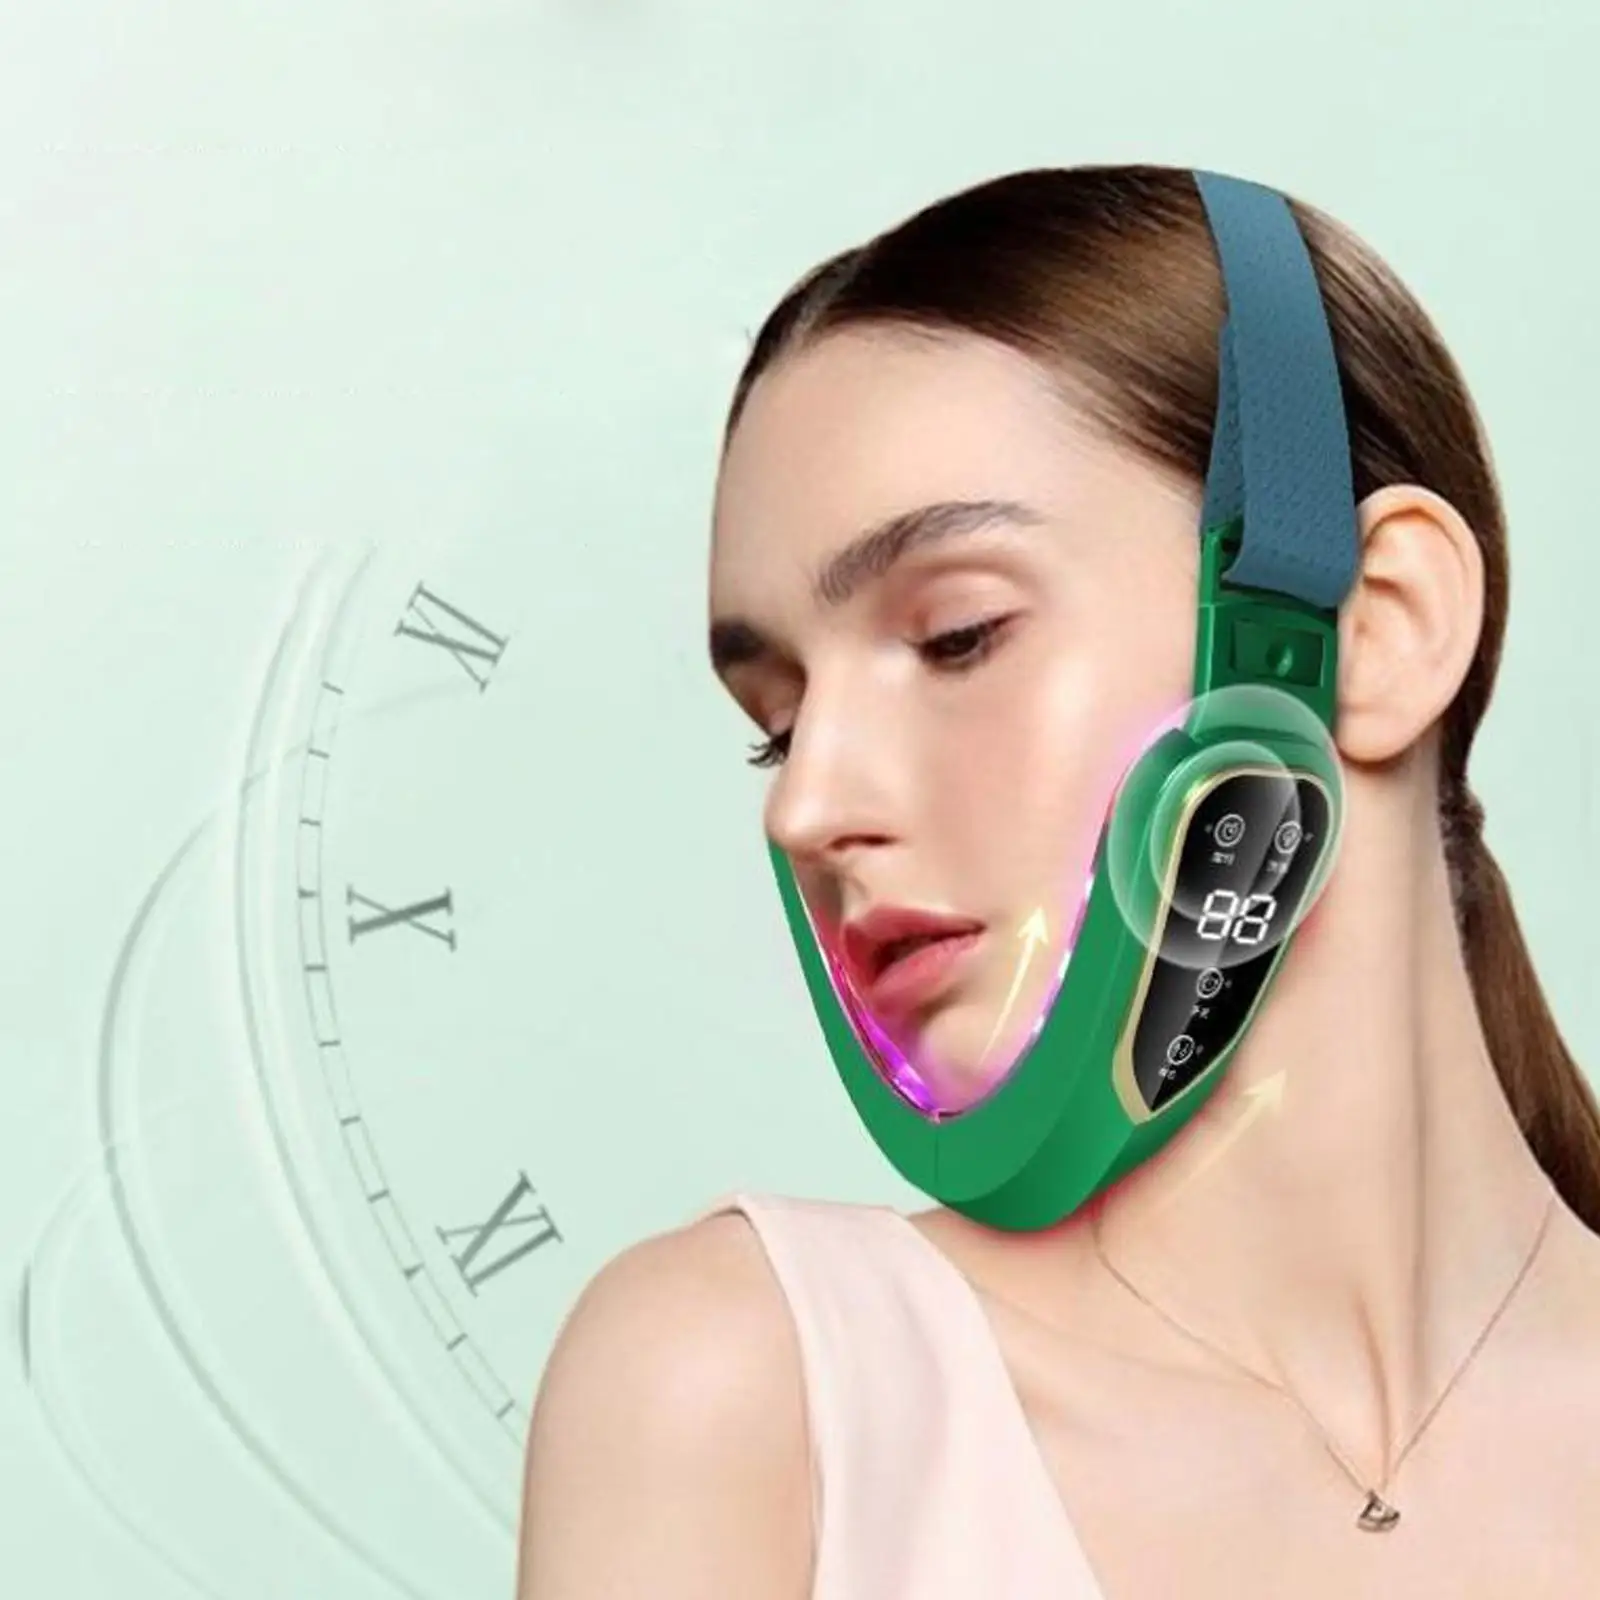 V Face Machine Face Slimming Strap for Therapy Machine Reduce Double Chin, Skin Toning Devices Face Lifting Firming Belt